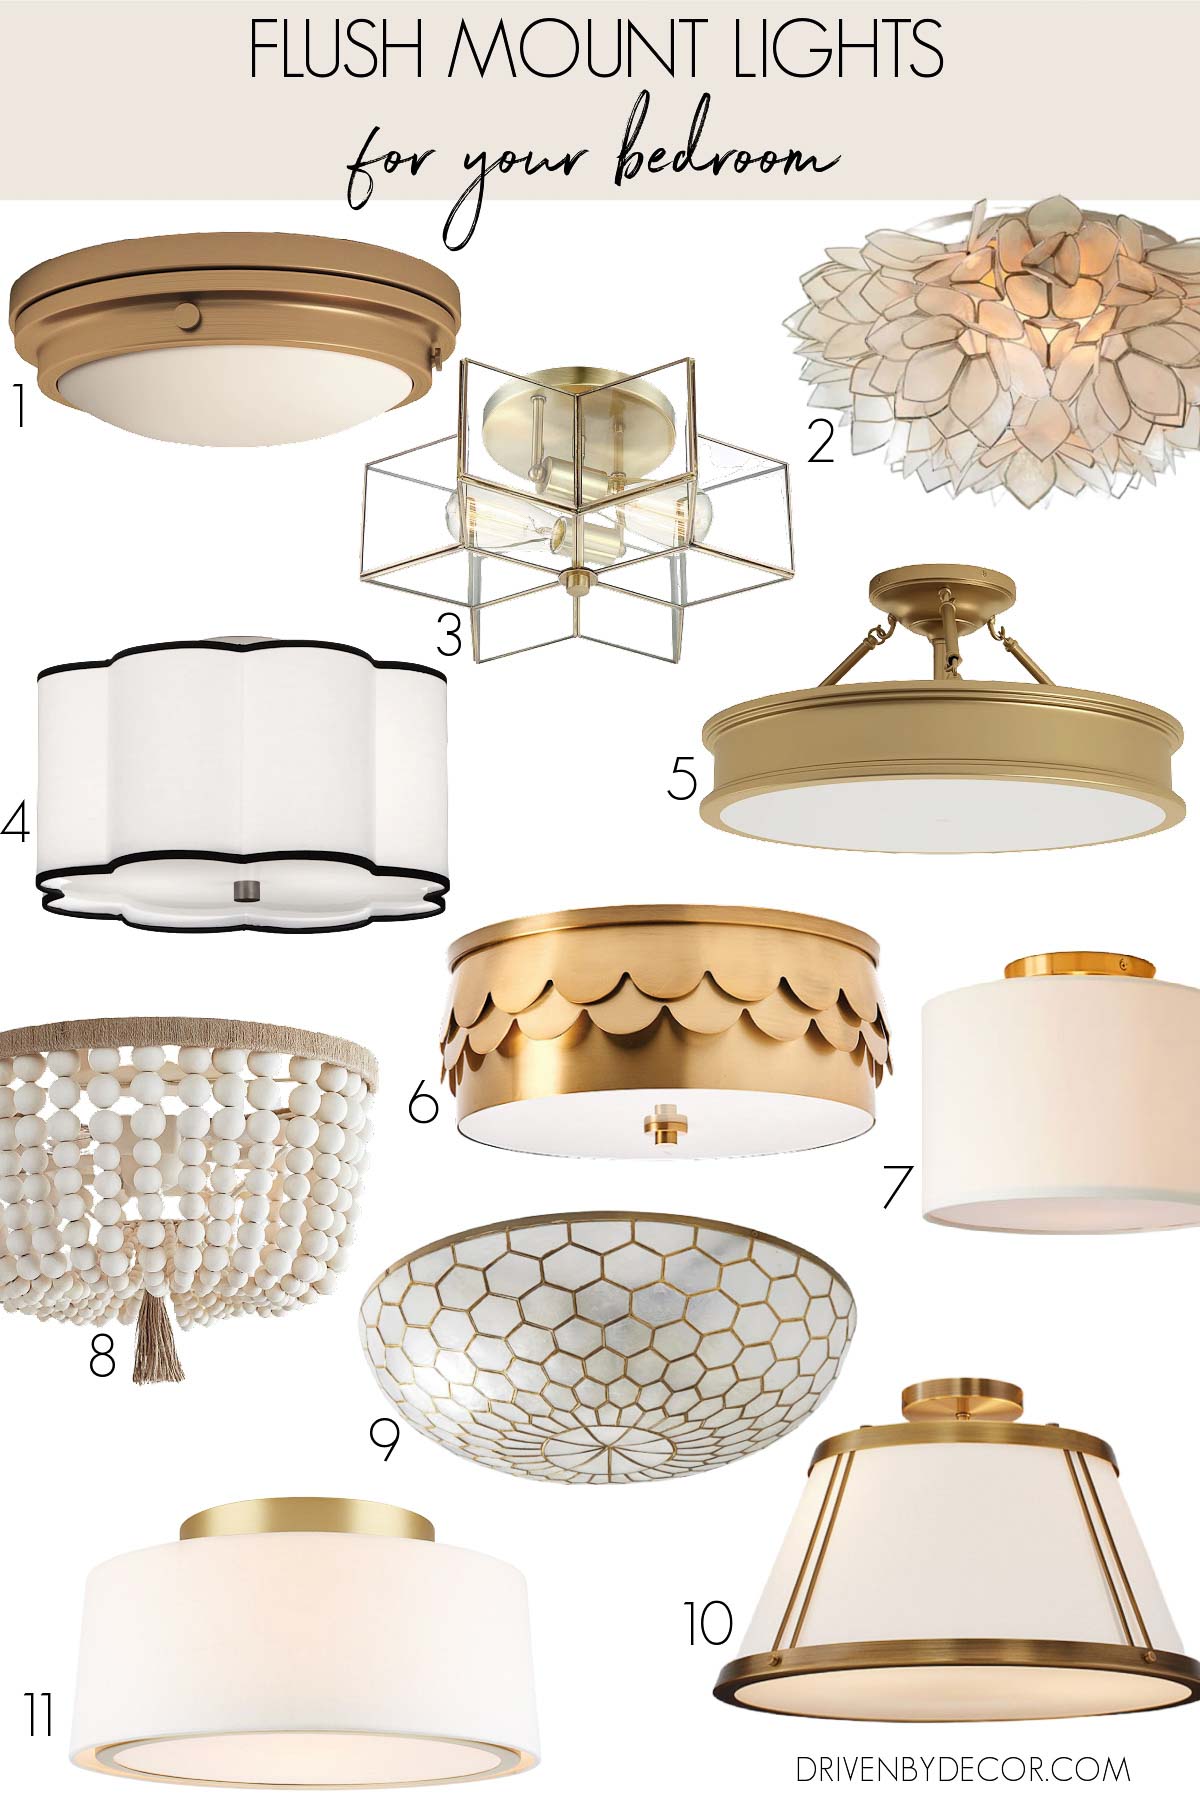 Bedroom Light Fixtures: My Complete Guide! - Driven by Decor